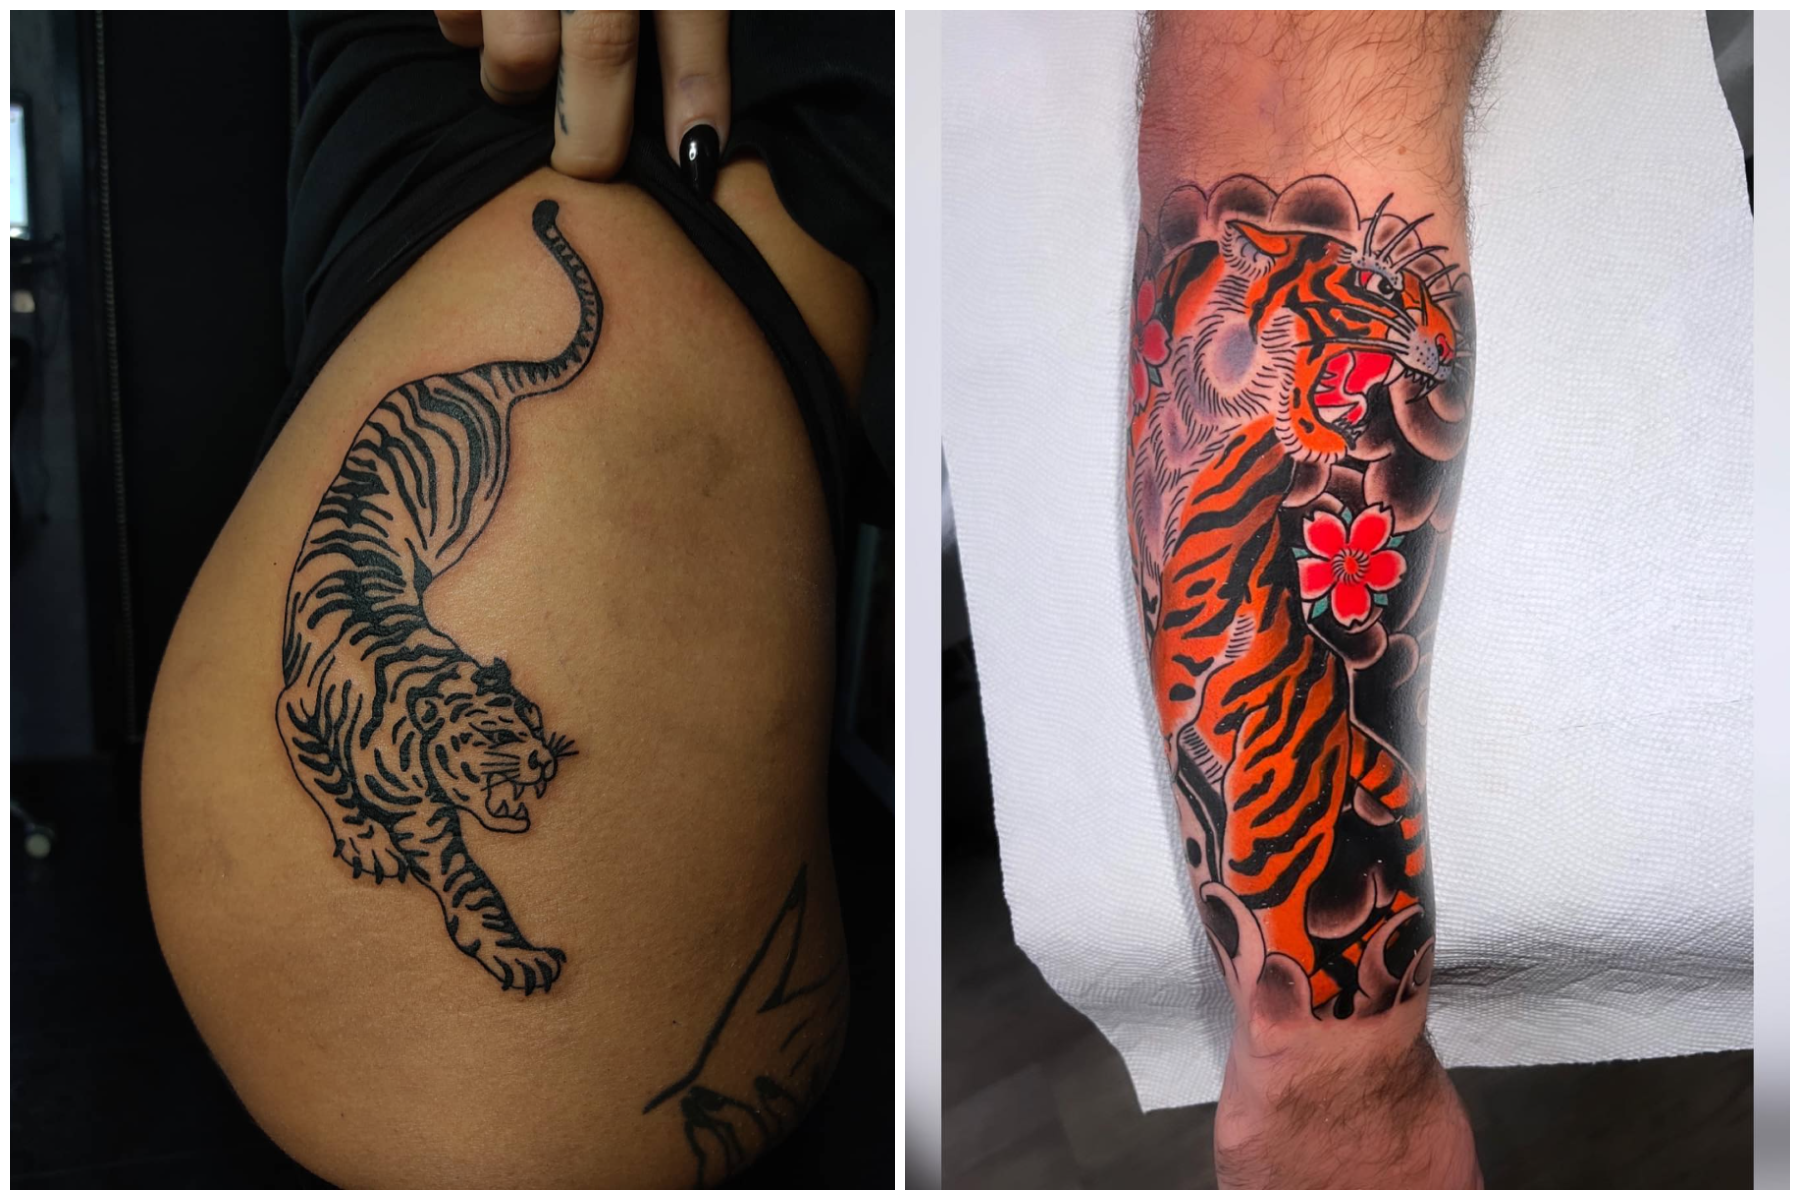 15 Japanese tiger tattoo designs and ideas that will convince you to get inked